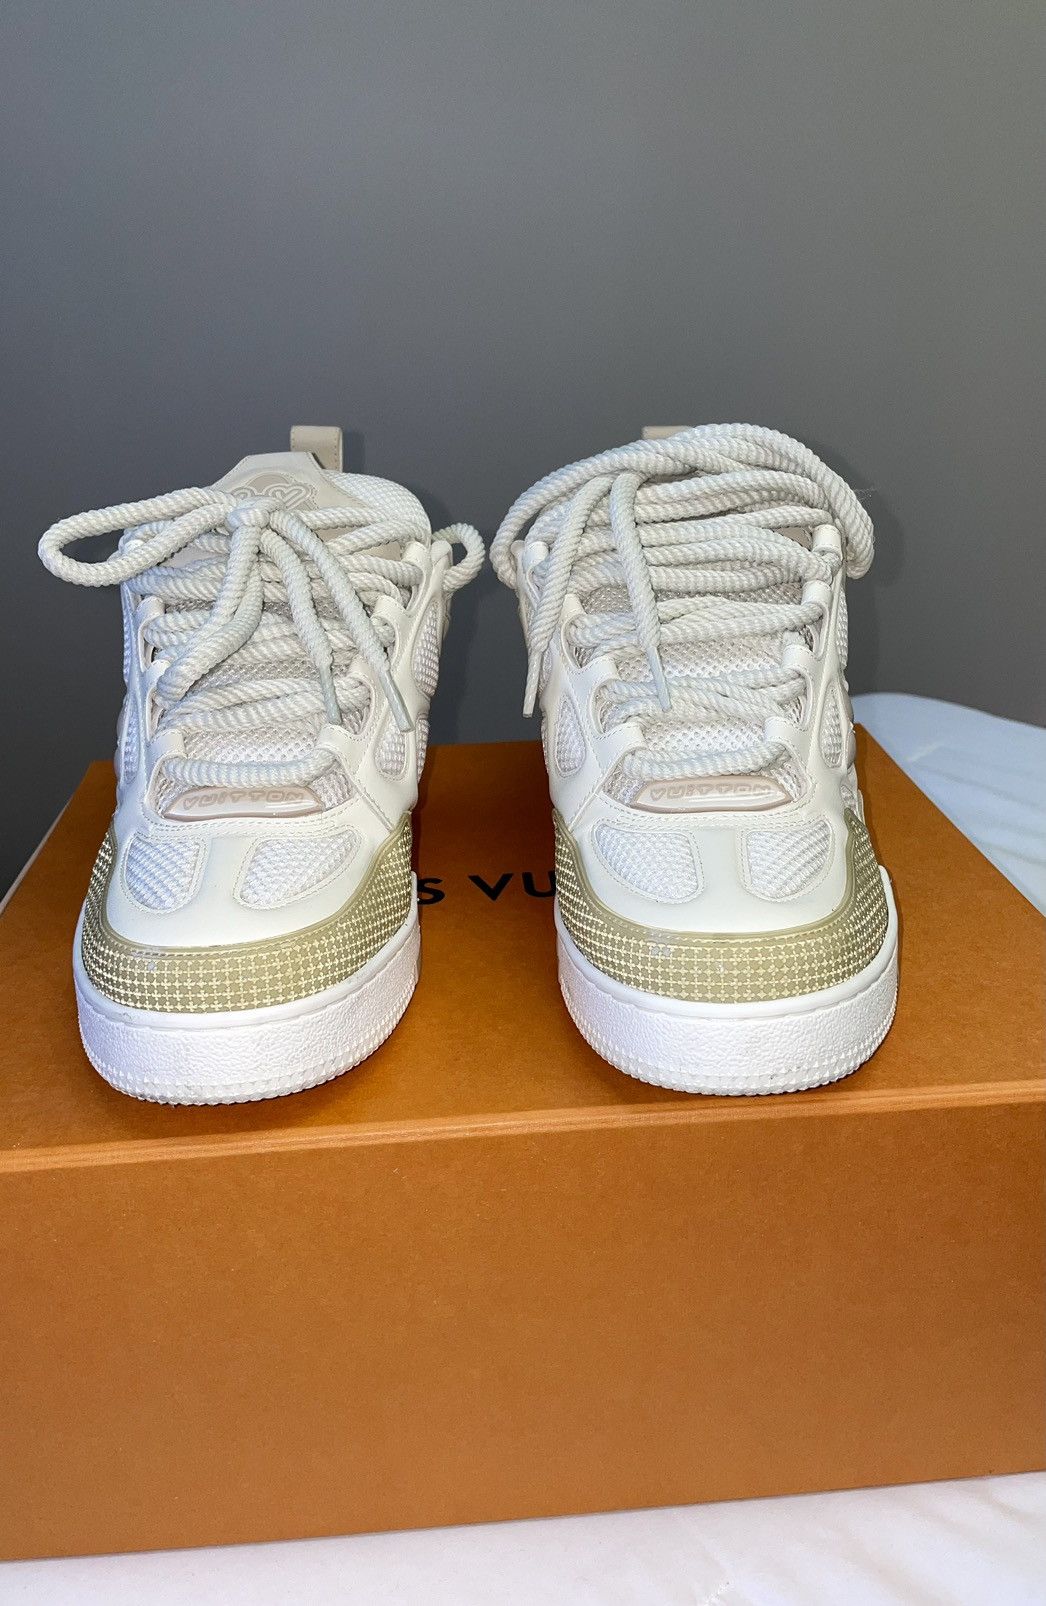 LV Trainer Sneaker 1A9ZBI Size 8.5 with box